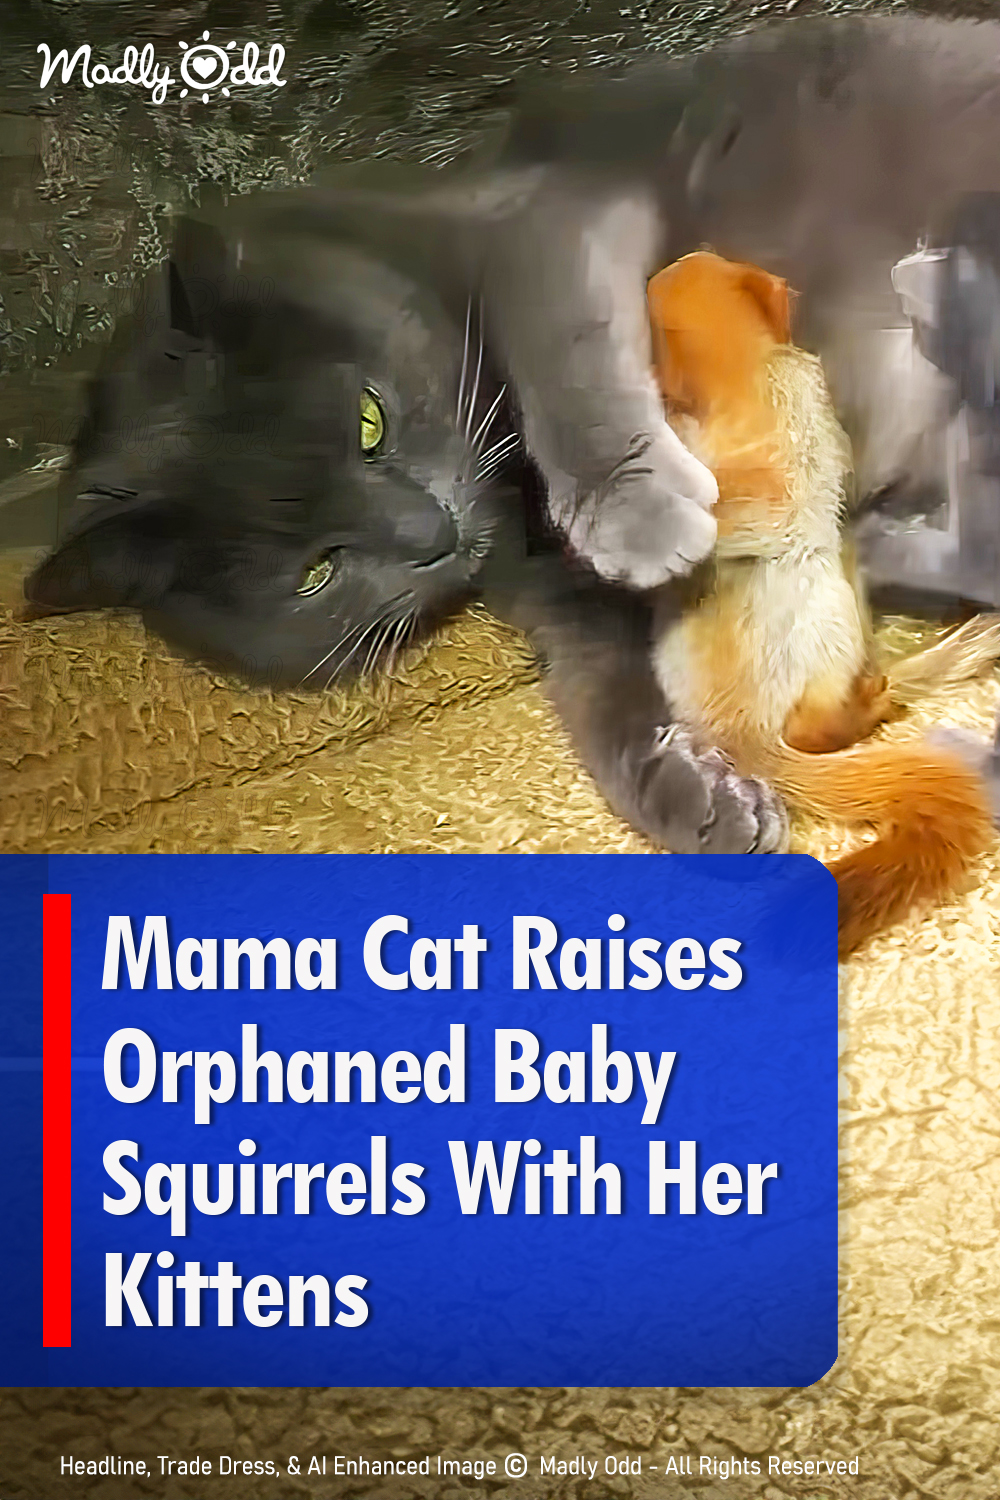 Mama cat raises orphaned baby squirrels with her kittens